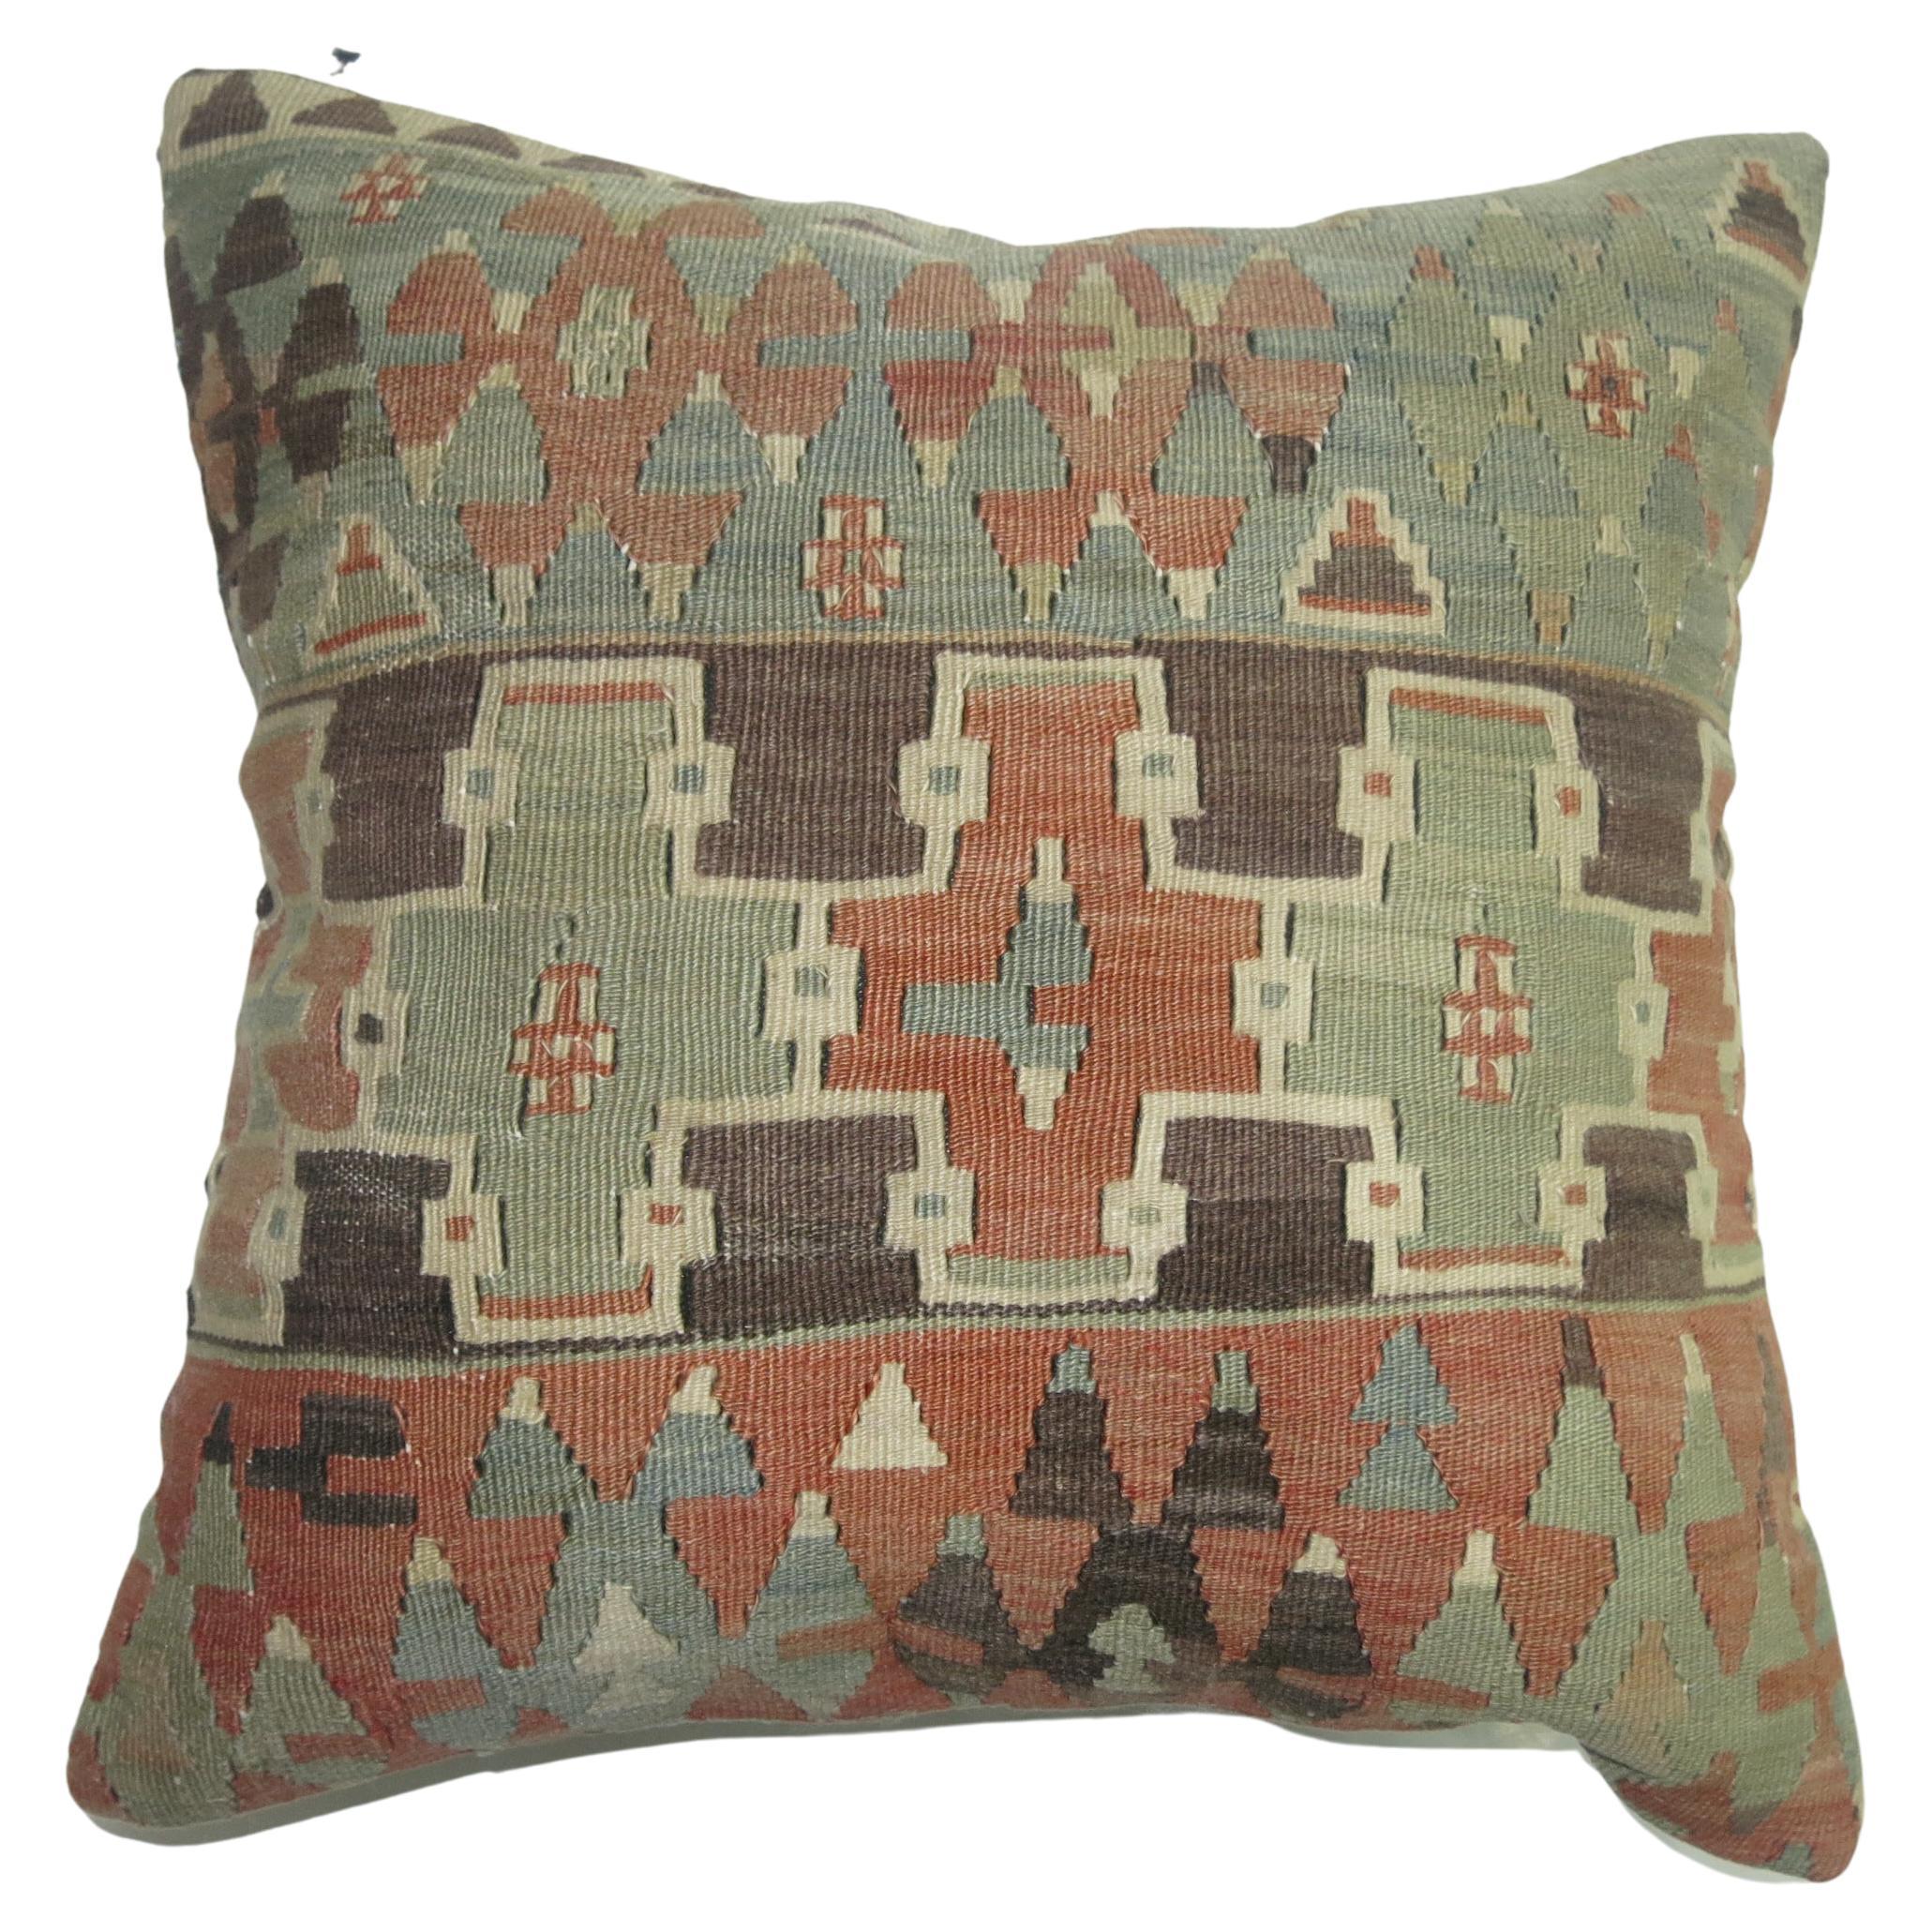 Pillow made from an early 20th century Turkish Kilim. Polyfill insert provided with a zipper closure.

Measures: 18'' x 18''.